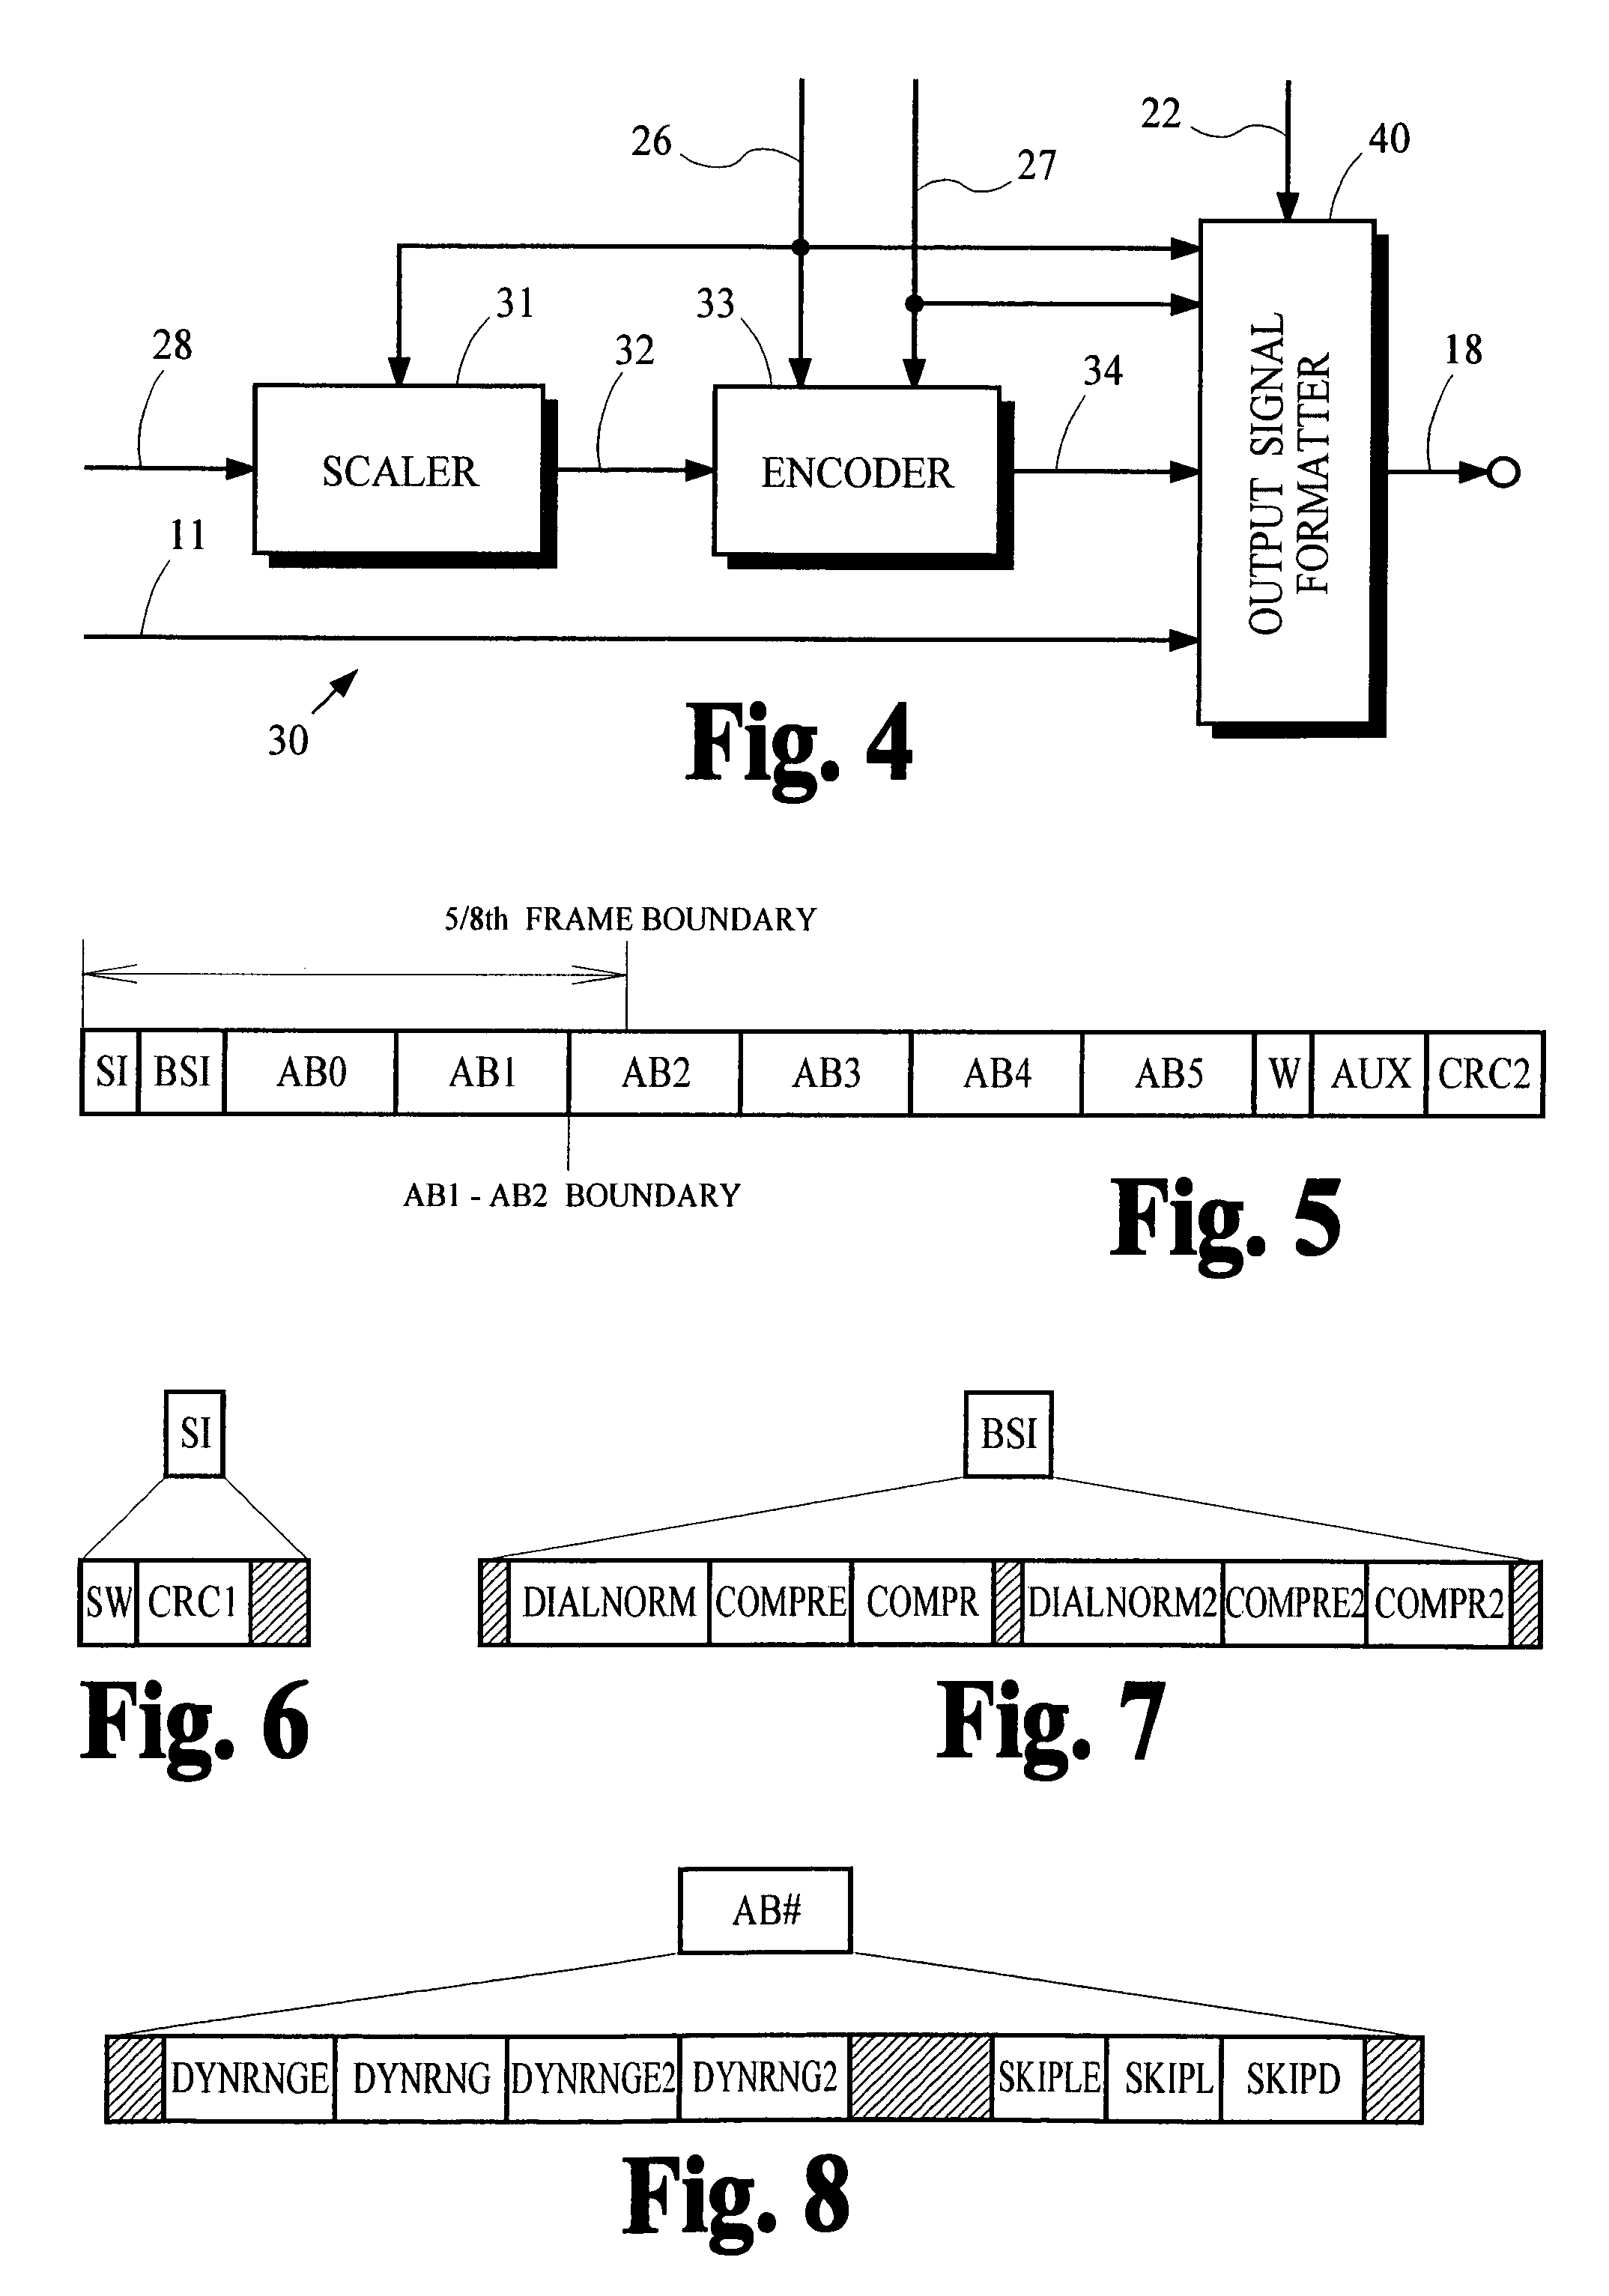 Method for correcting metadata affecting the playback loudness and dynamic range of audio information